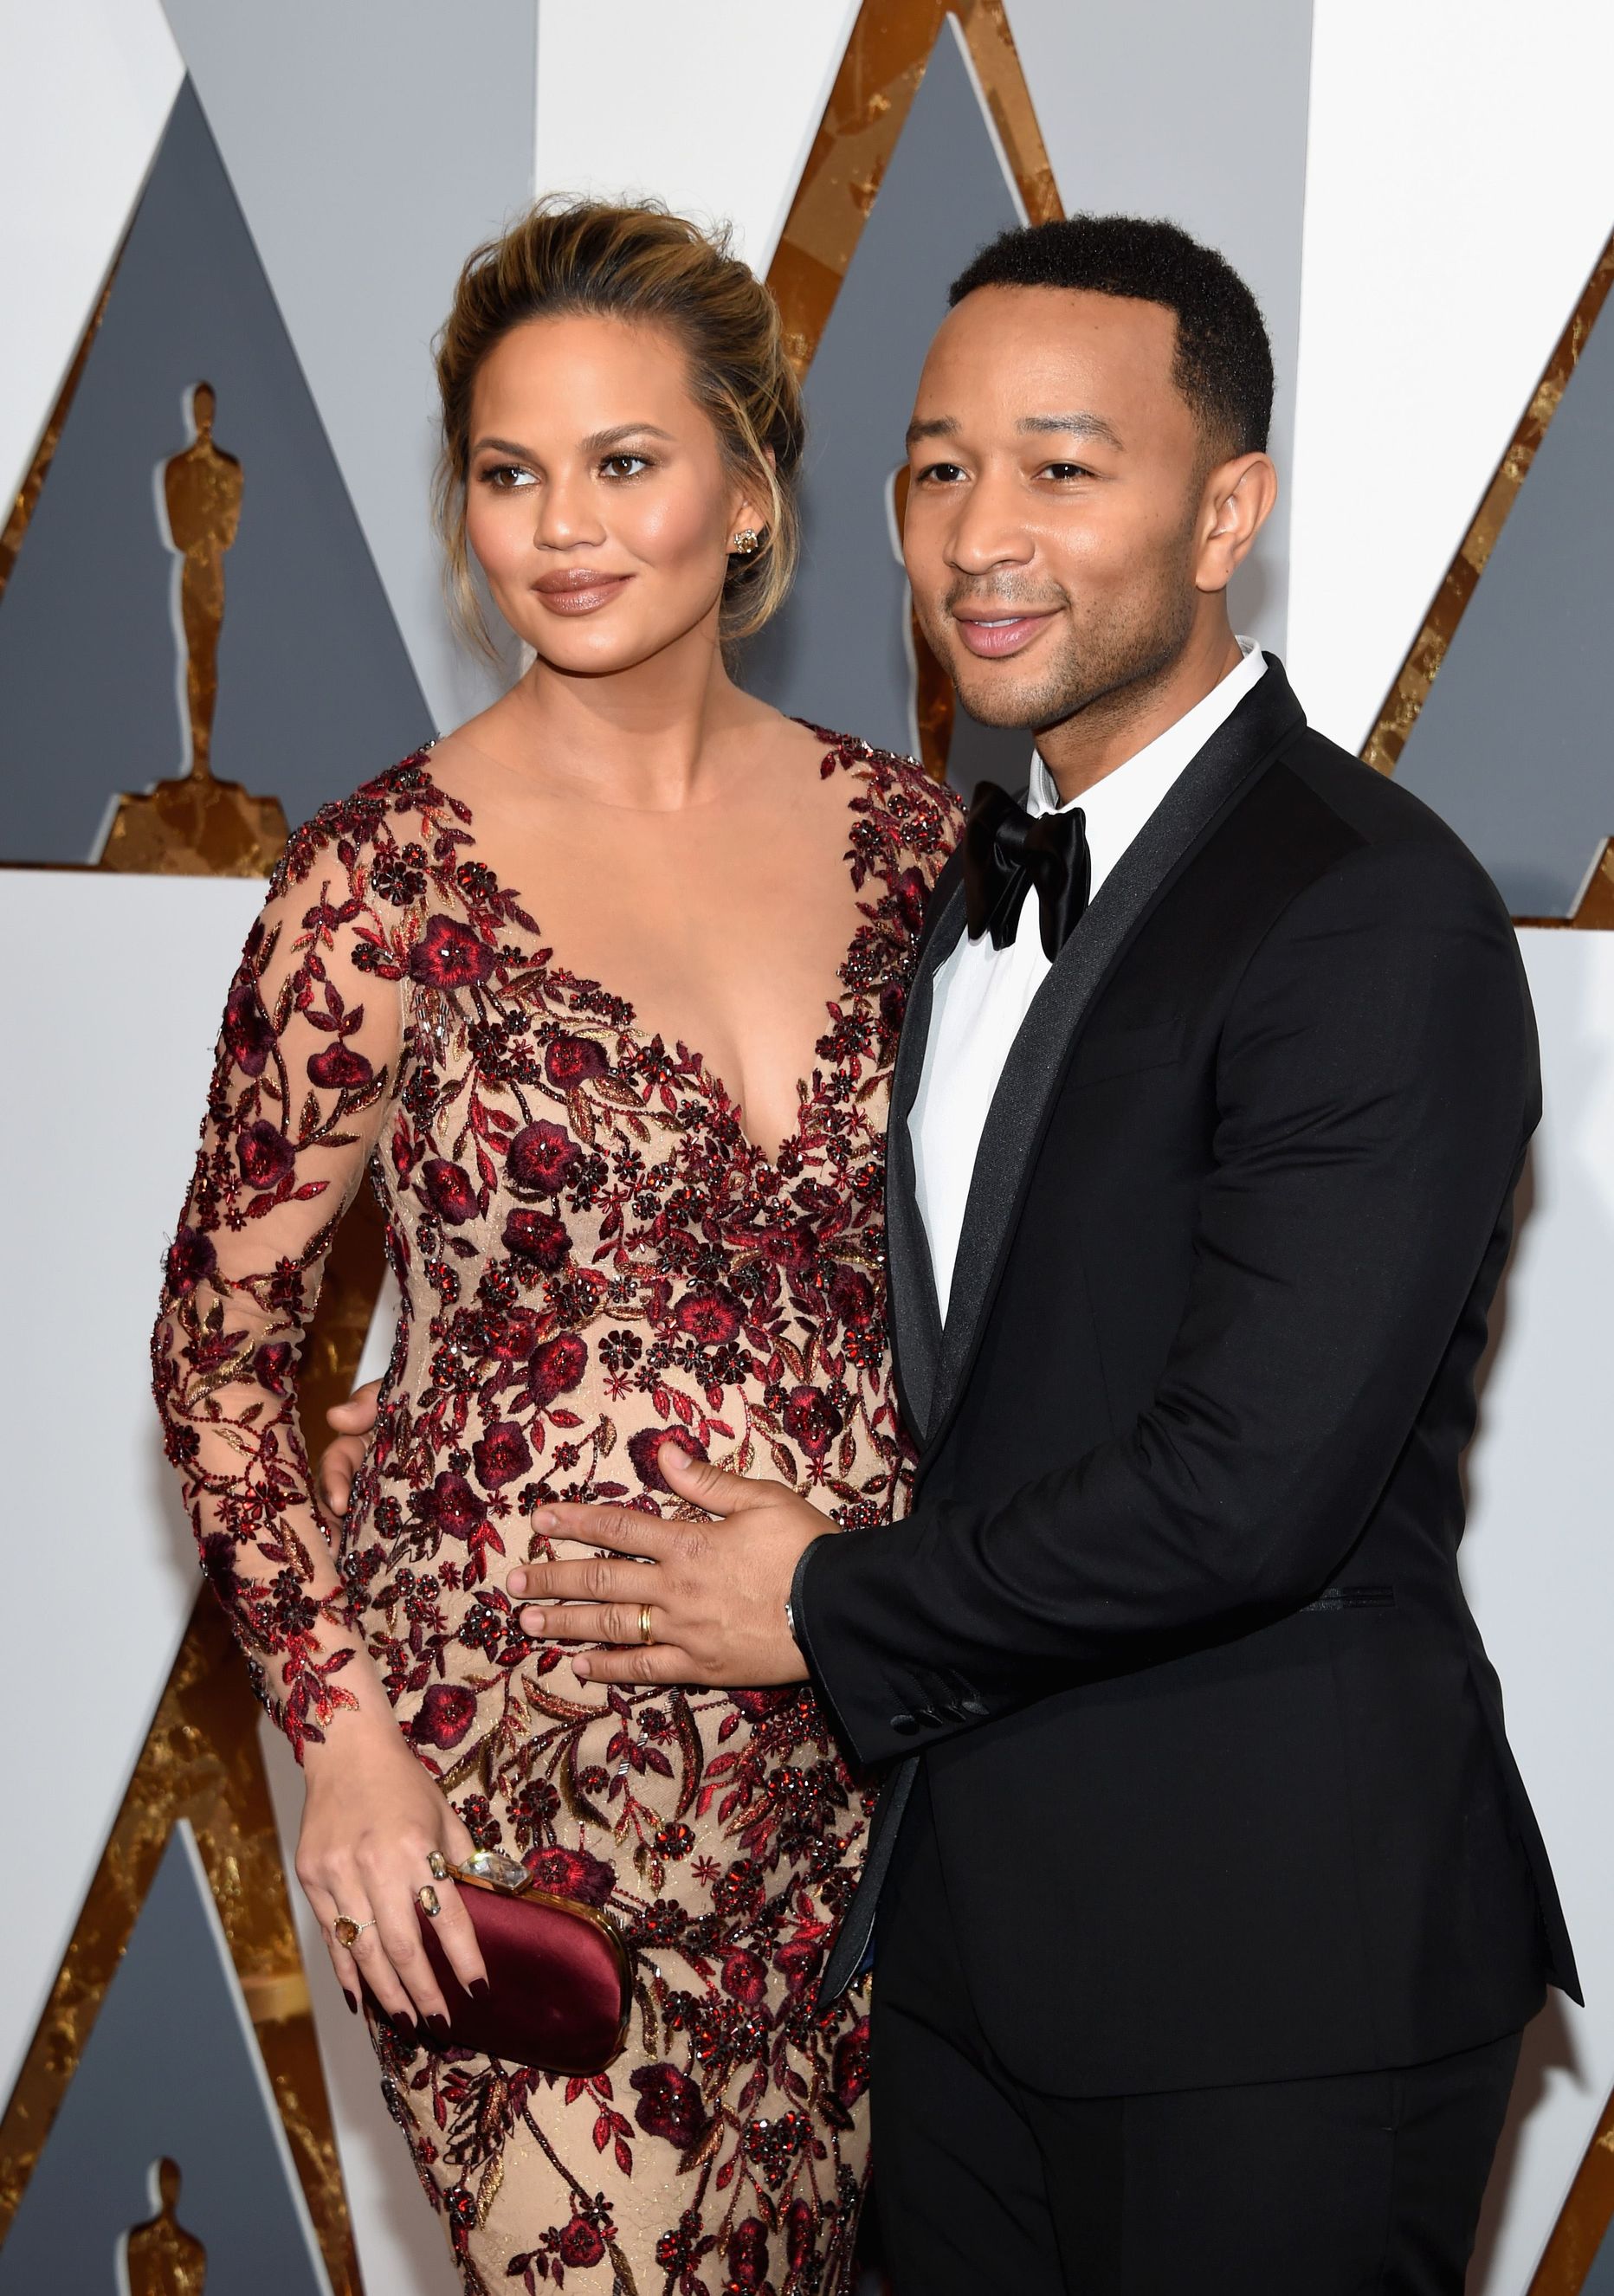 HOLLYWOOD, CA - FEBRUARY 28: Model Chrissy Teigen and musician John Legend attend the 88th Annual Academy Awards at Hollywood & Highland Center on February 28, 2016 in Hollywood, California.   Ethan Miller/Getty Images/AFP
== FOR NEWSPAPERS, INTERNET, TELCOS & TELEVISION USE ONLY ==